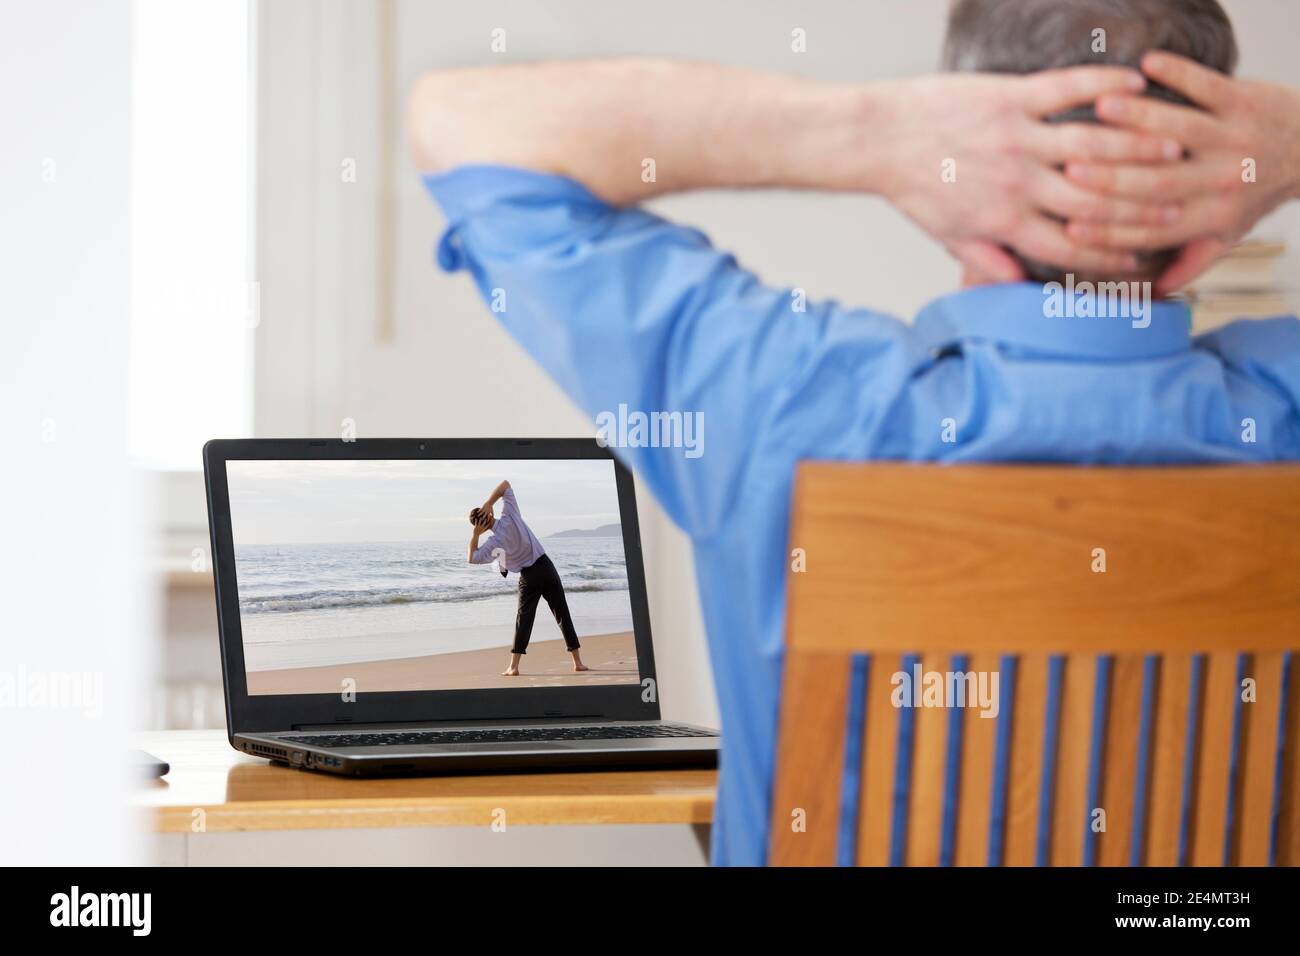 Businessman in home office doing stretching or relaxation exercise in front of laptop with man doing yoga on a beach - focus on the screen Stock Photo